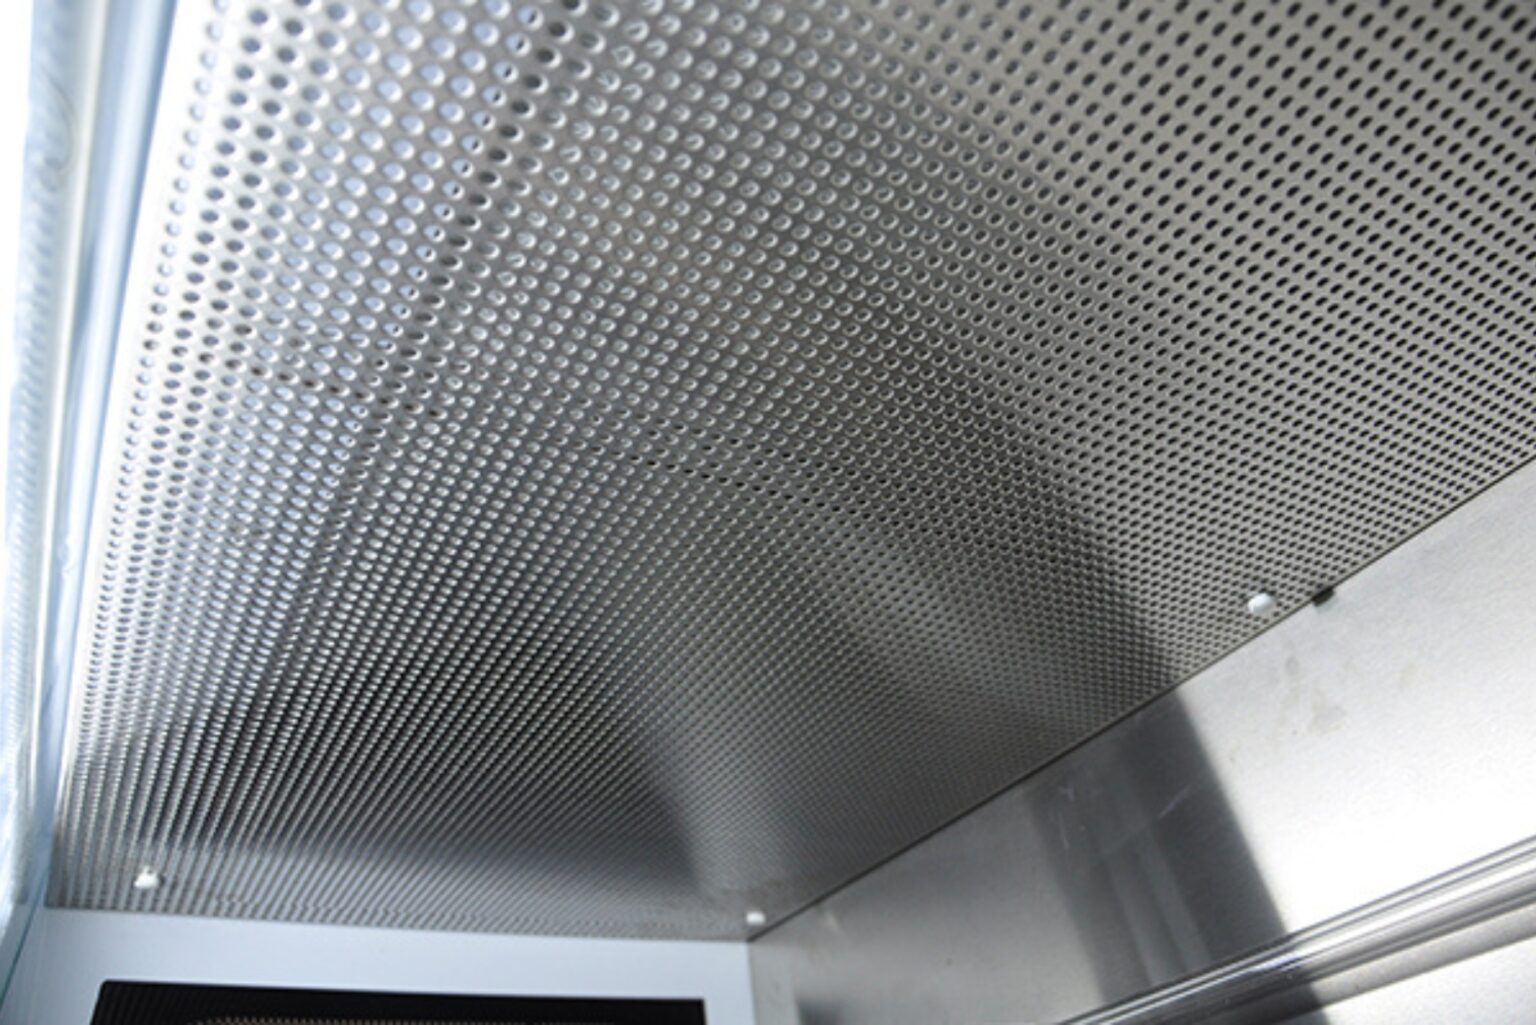 TION A2 Recirculating Class II Biosafety Cabinet Ceiling